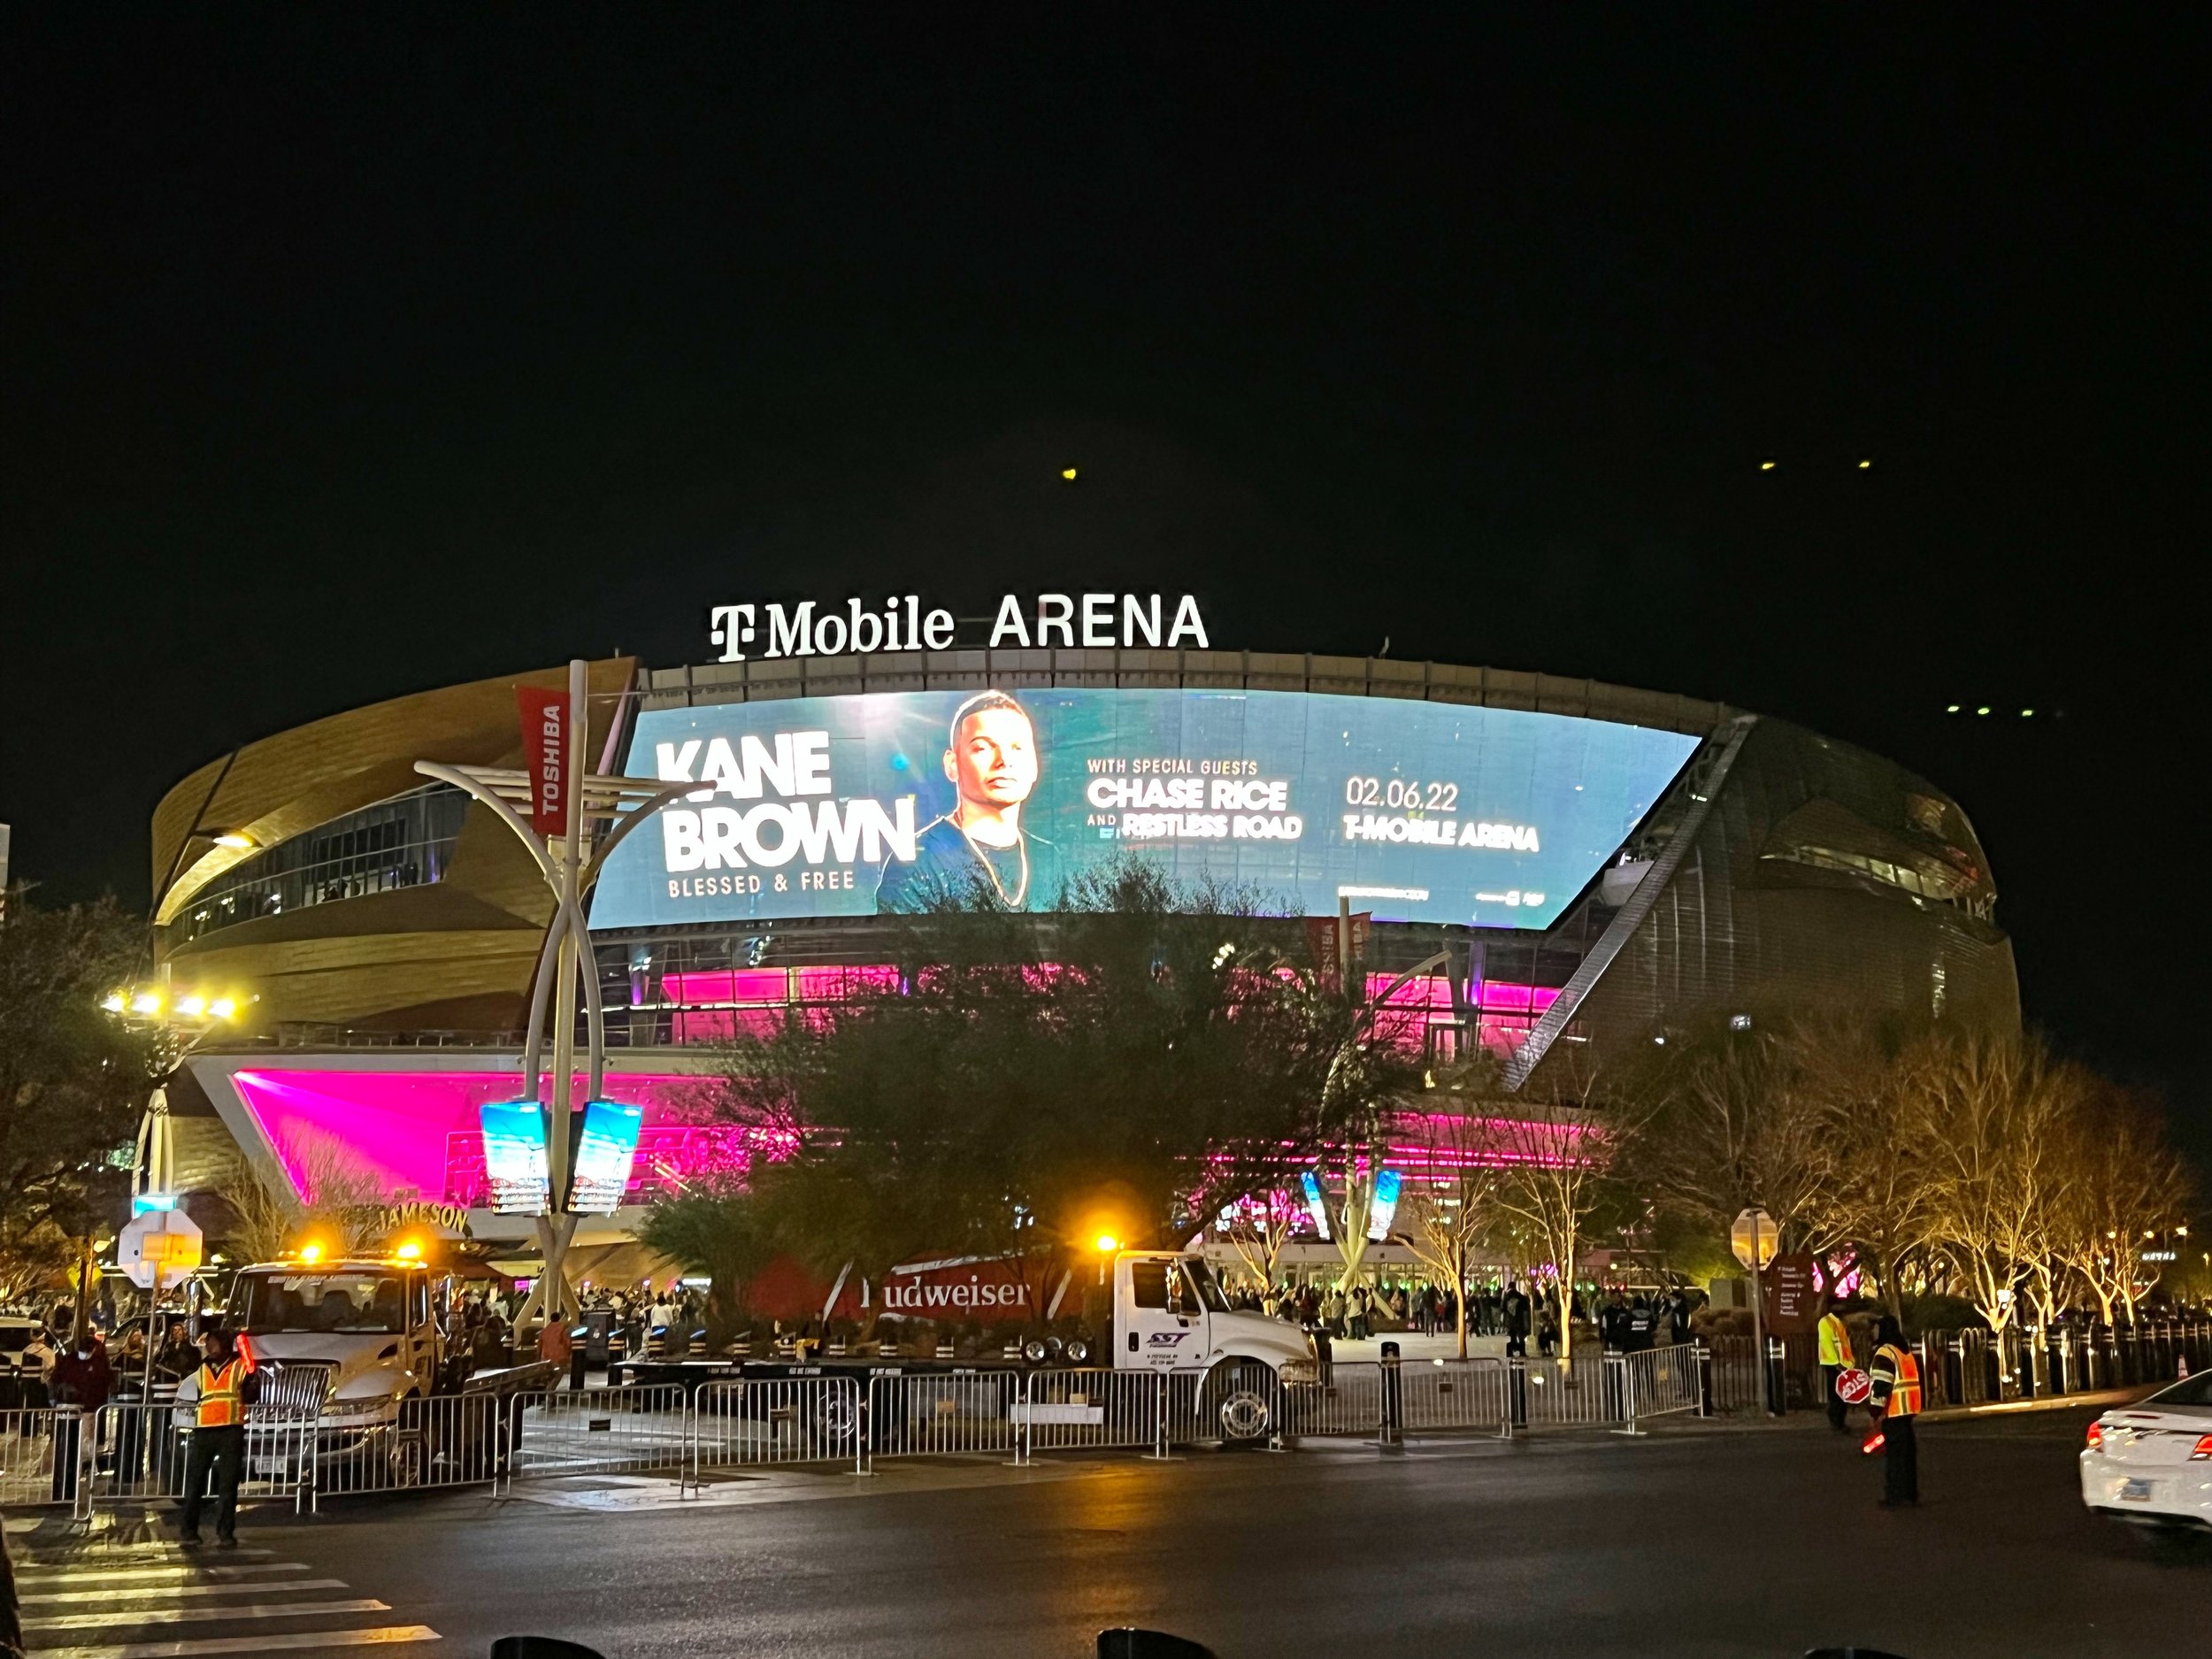 The T-Mobile Arena